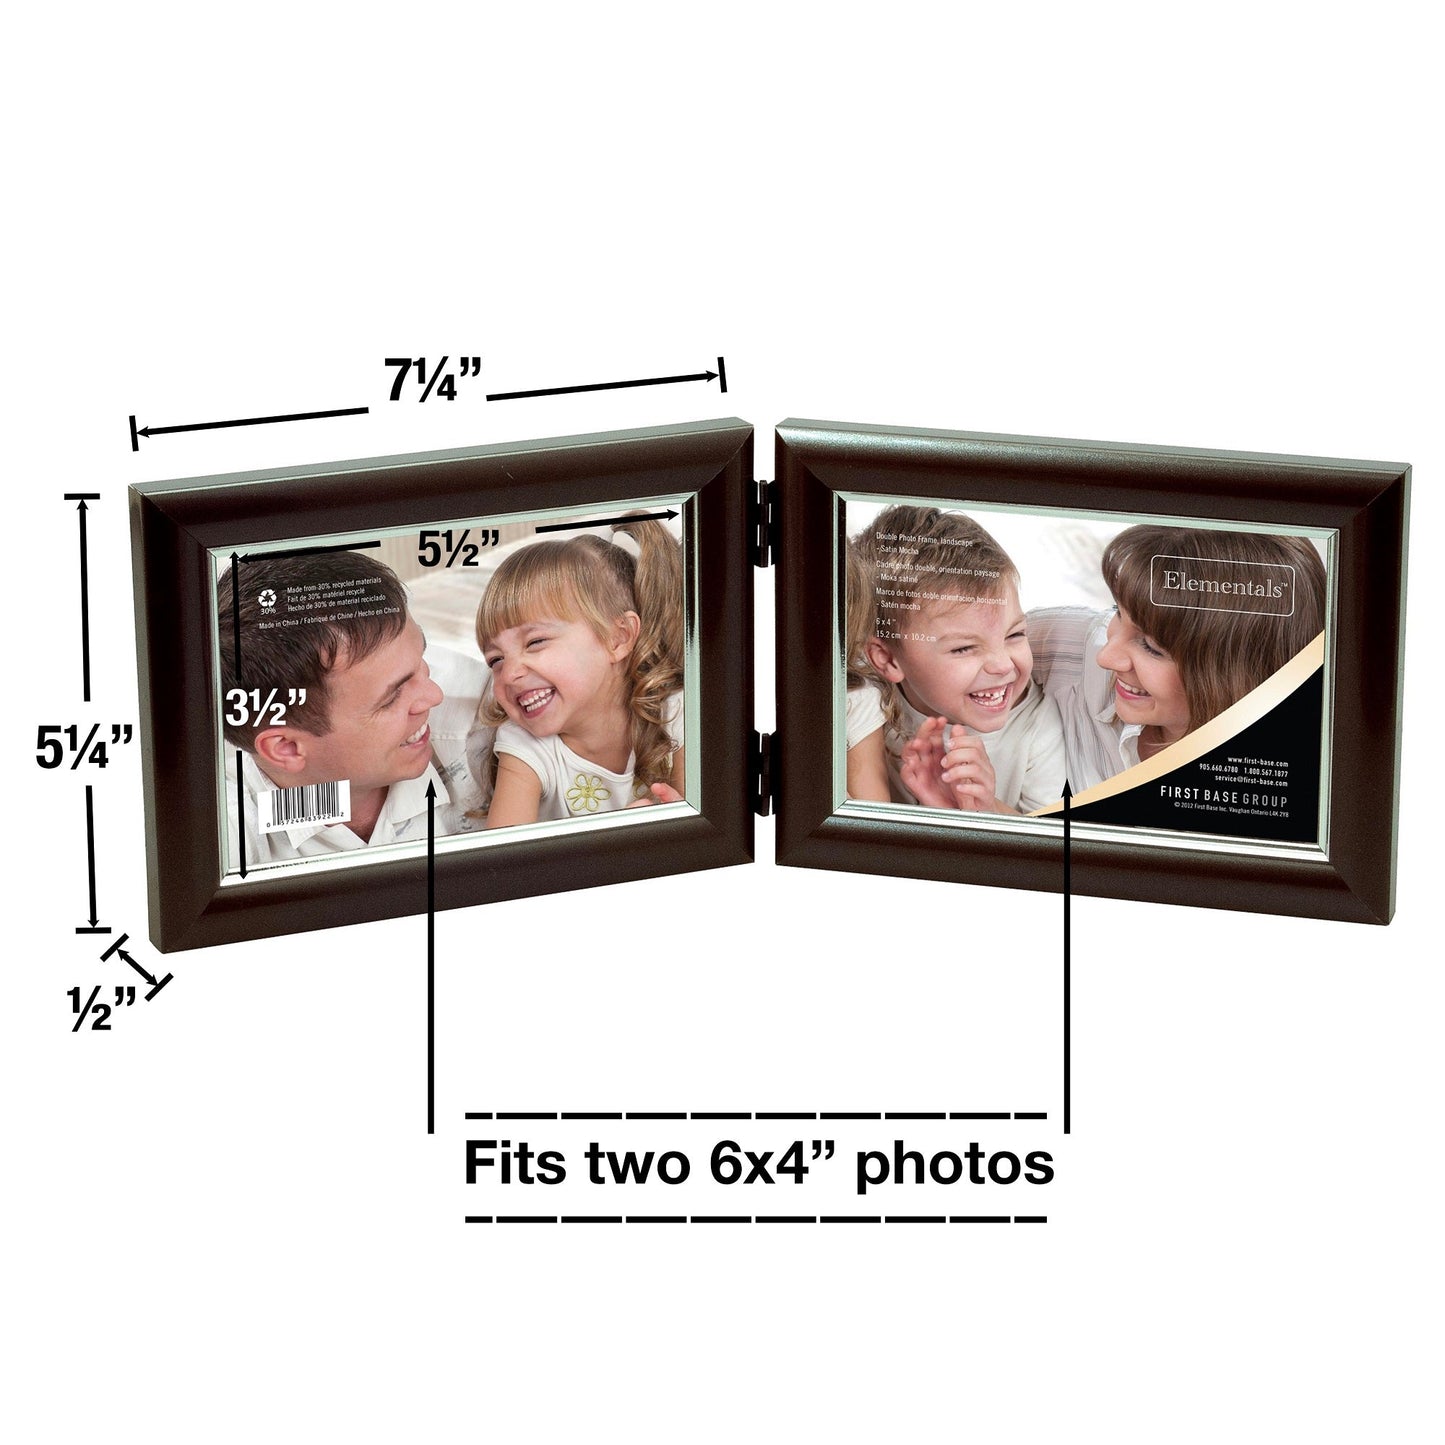 Dual Picture Photo Frame - For 2 6x4" Pictures - Horizontal - Easy Insert - Satin Mocha - Table Top Display